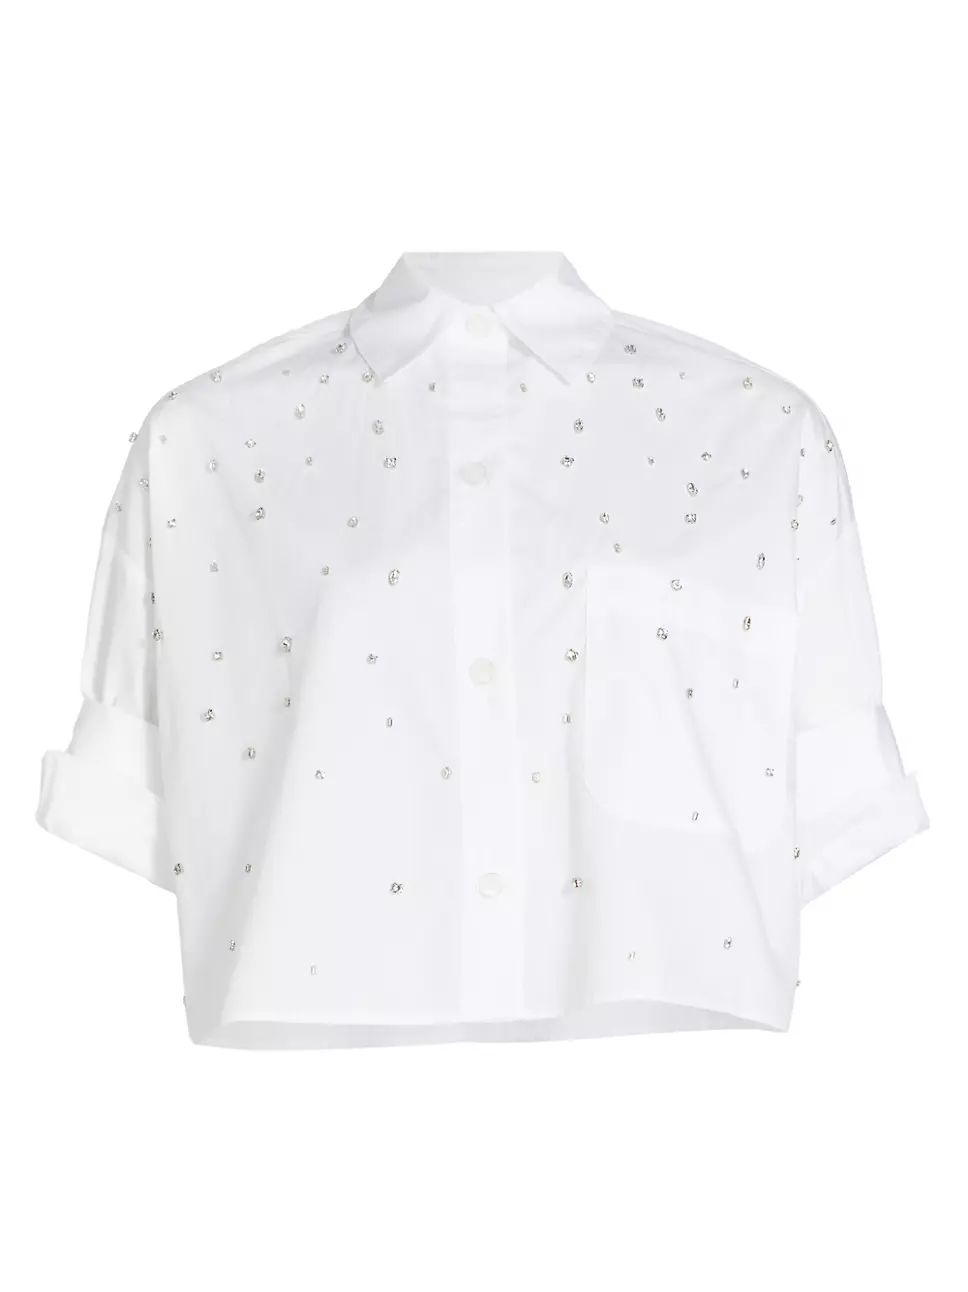 TWP Next Ex Cropped Crystal Shirt | Saks Fifth Avenue